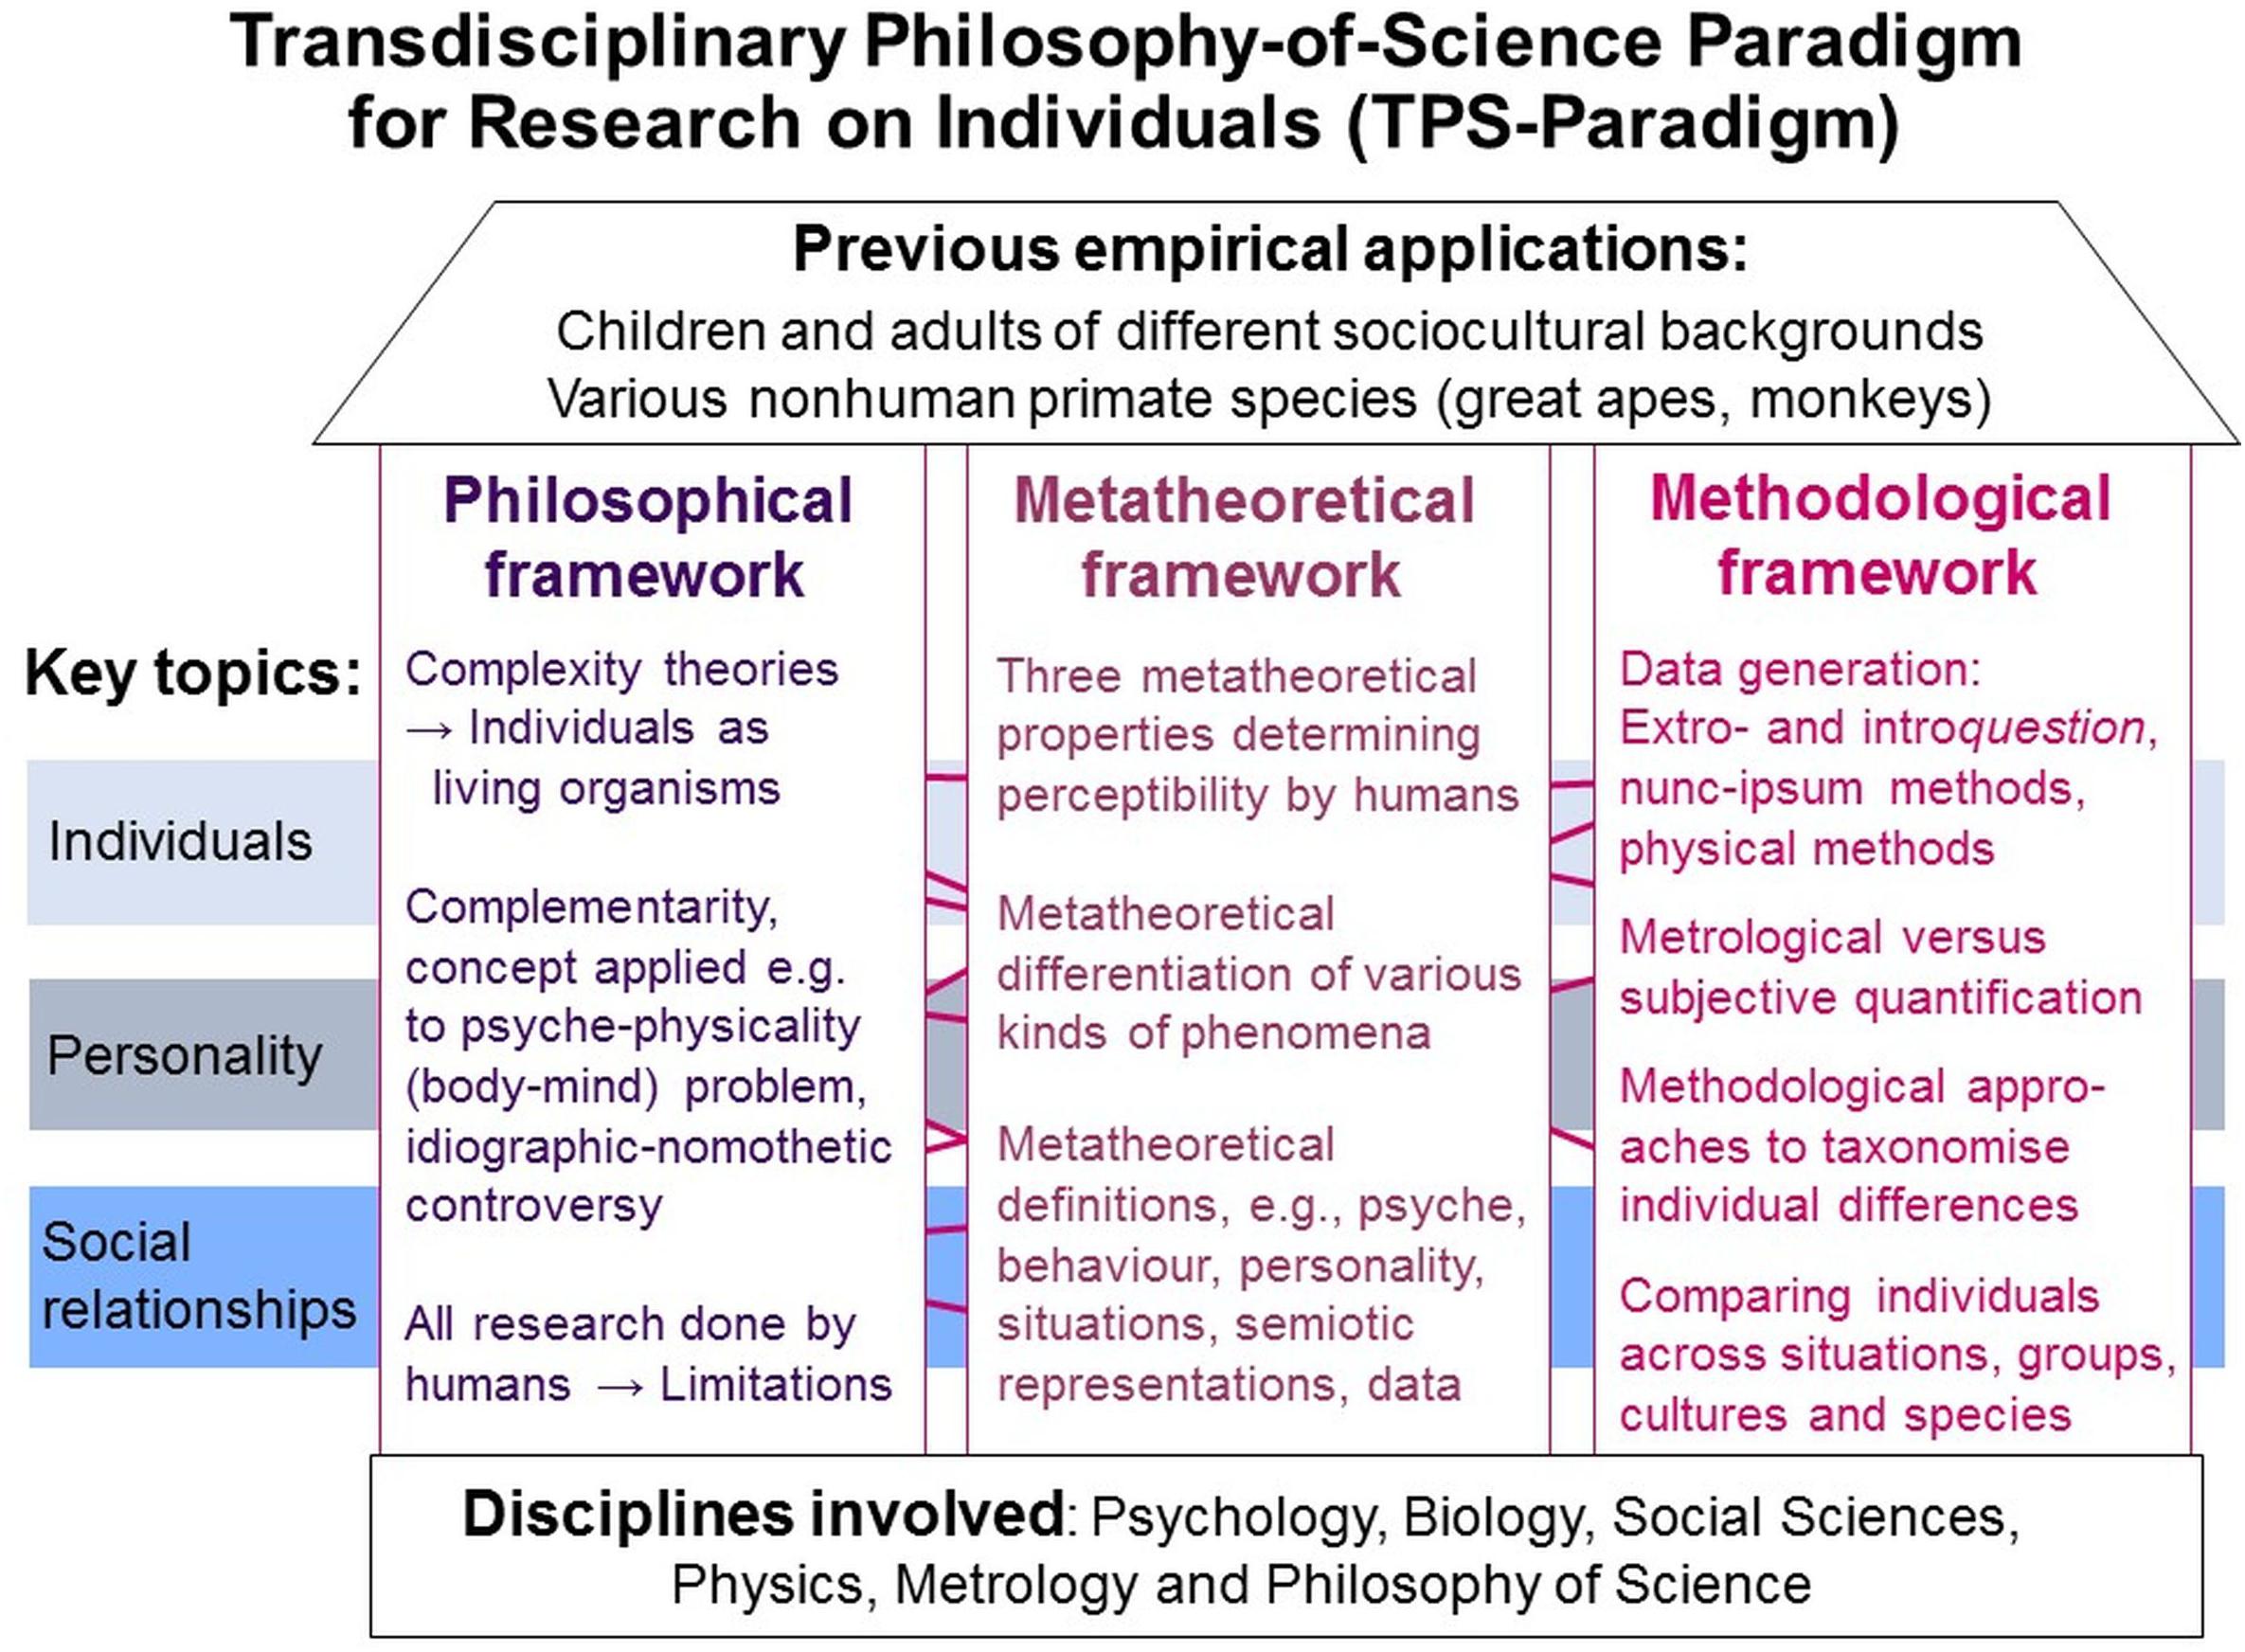 Transdisciplinary Philosophy-Of-Science Paradigm for Research on Individual...